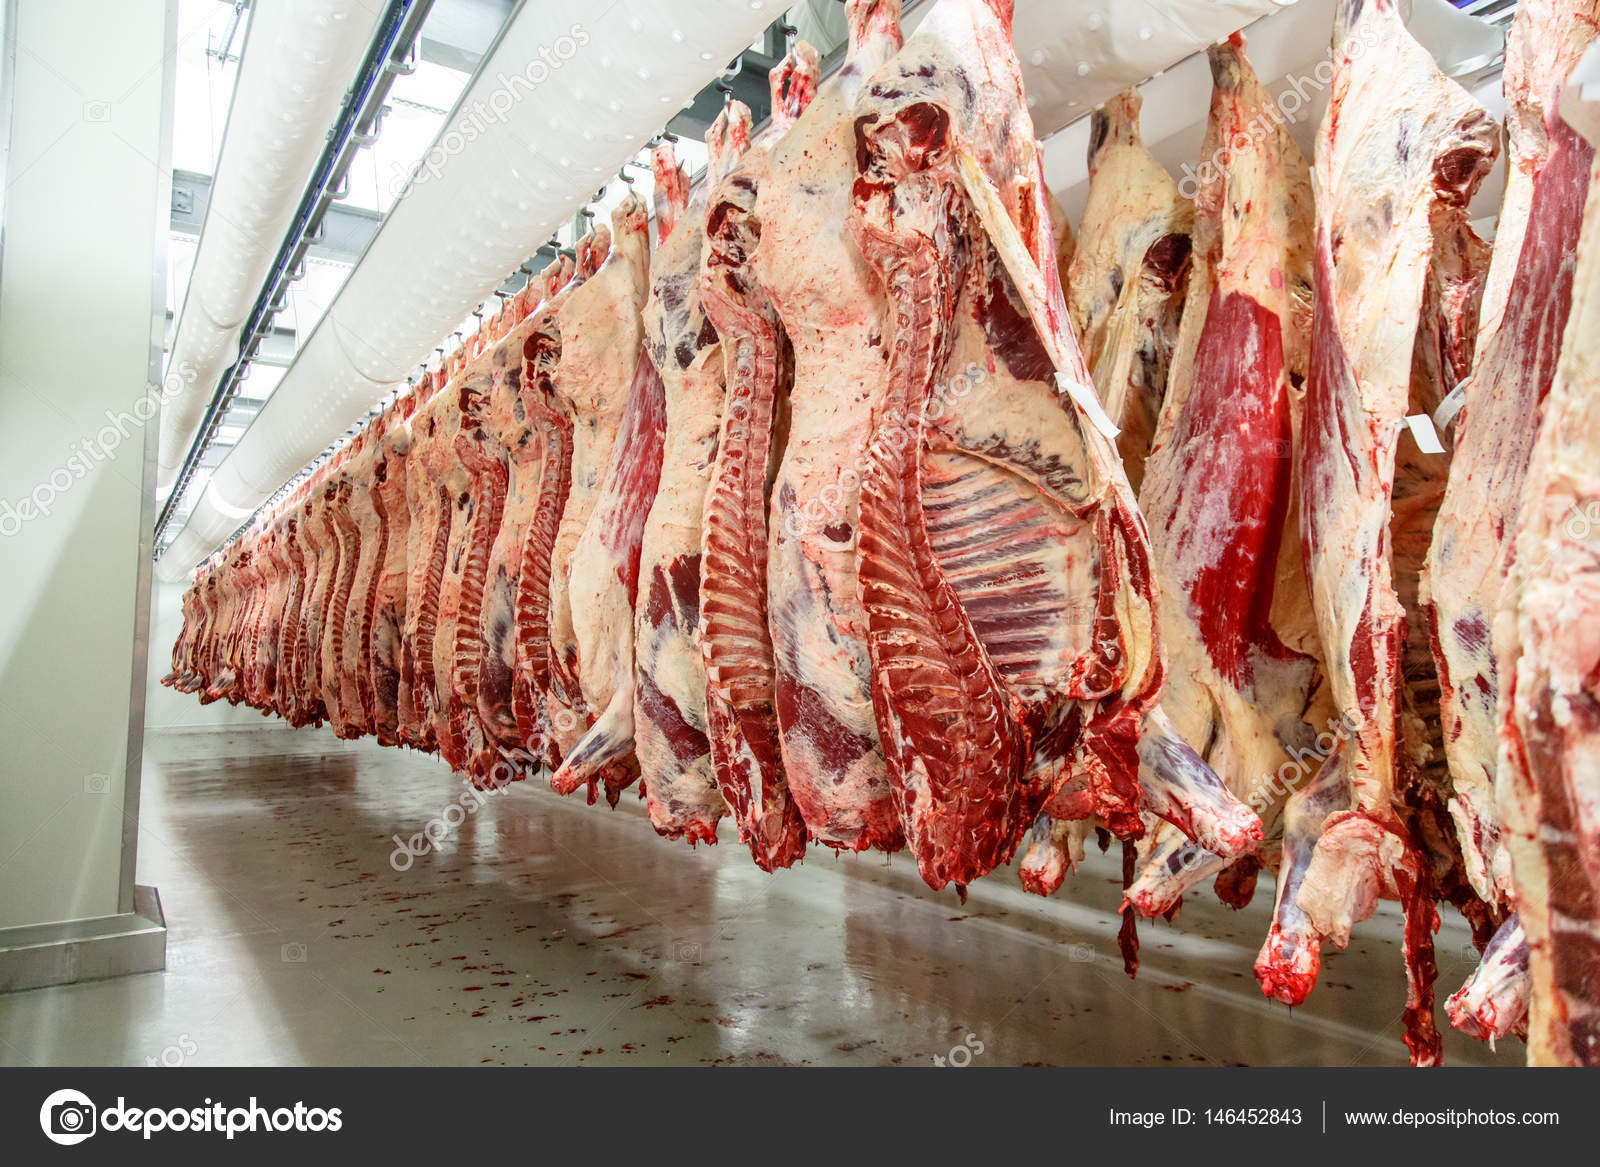 The meat processing plant. carcasses of beef hang on hooks. — Stock Photo ©  milanchikov #146452843